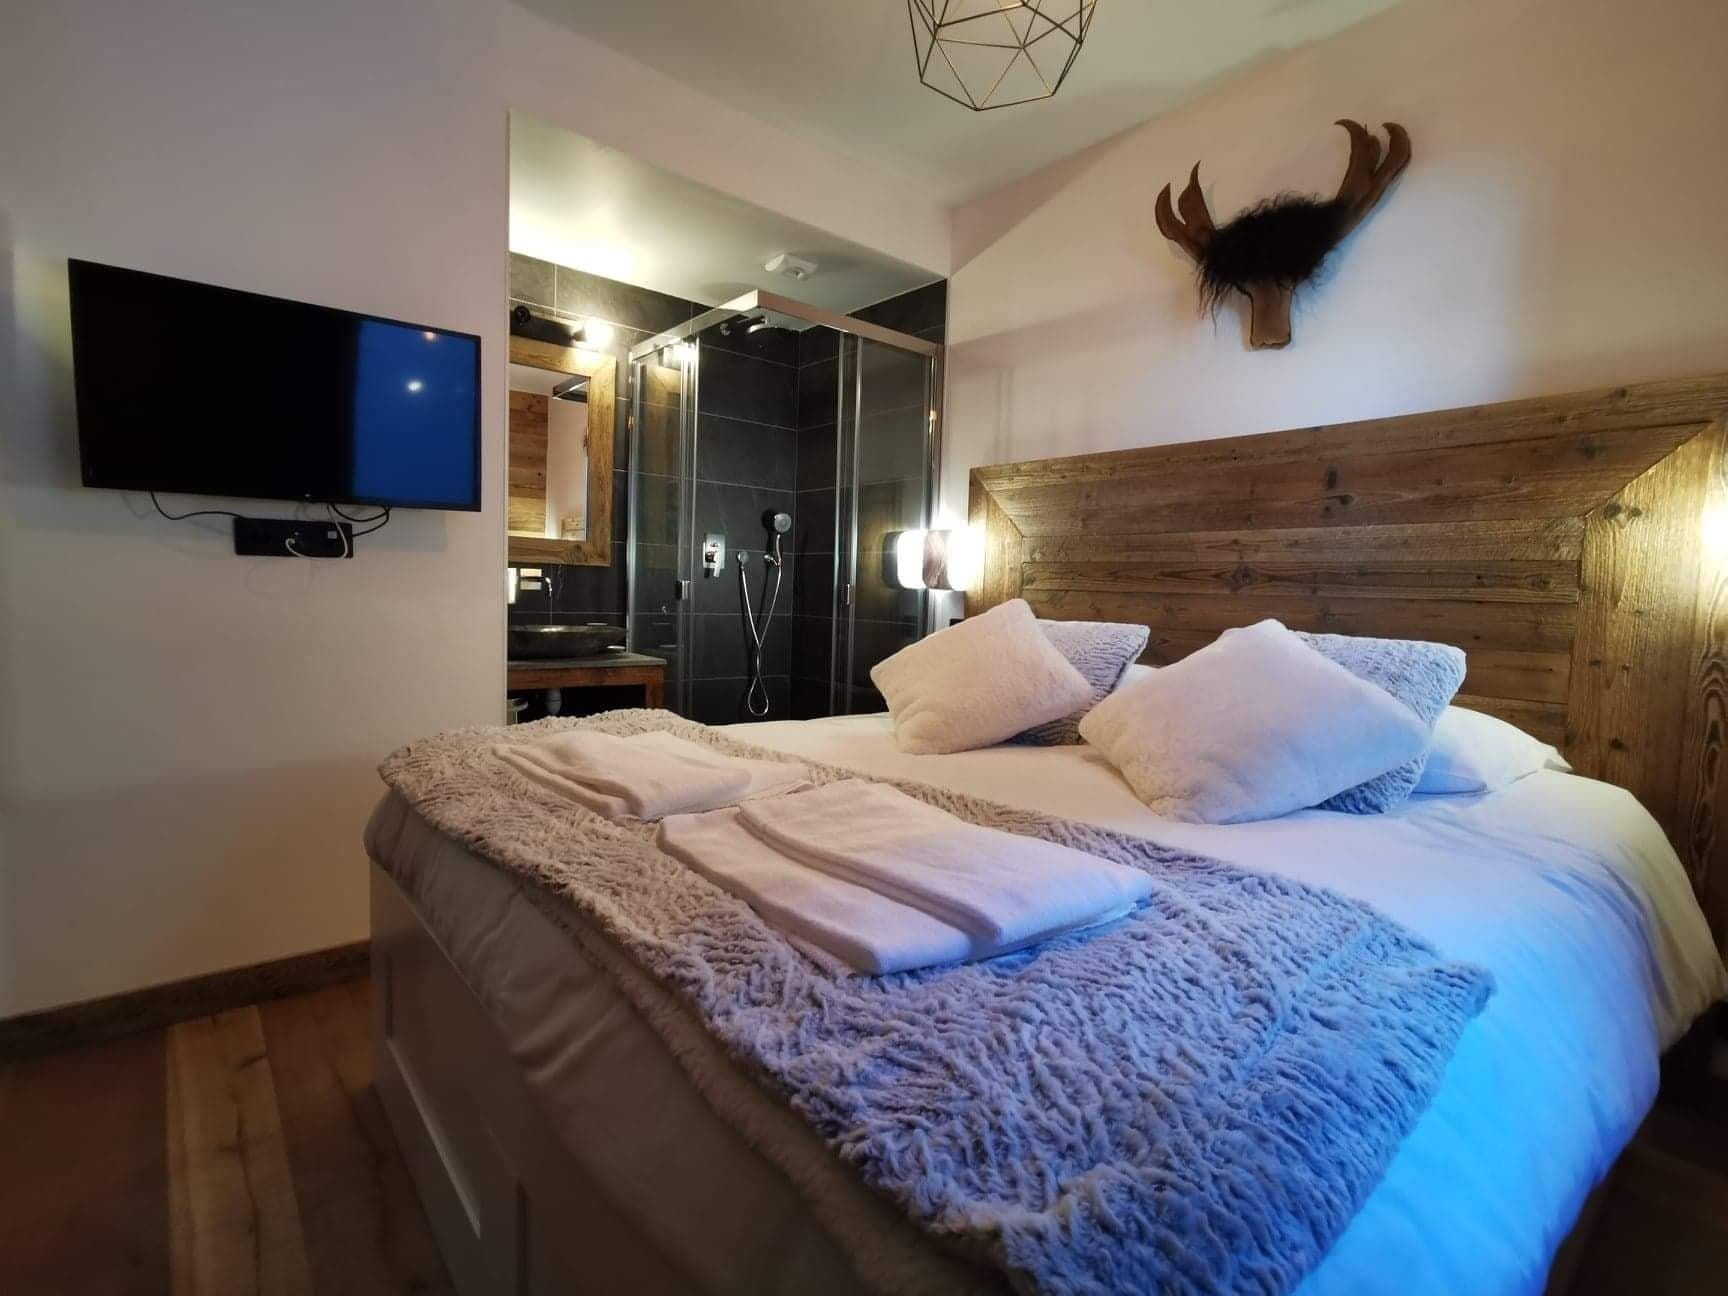 1 bed Apartment For Sale in Praz de Lys Sommand, French Alps